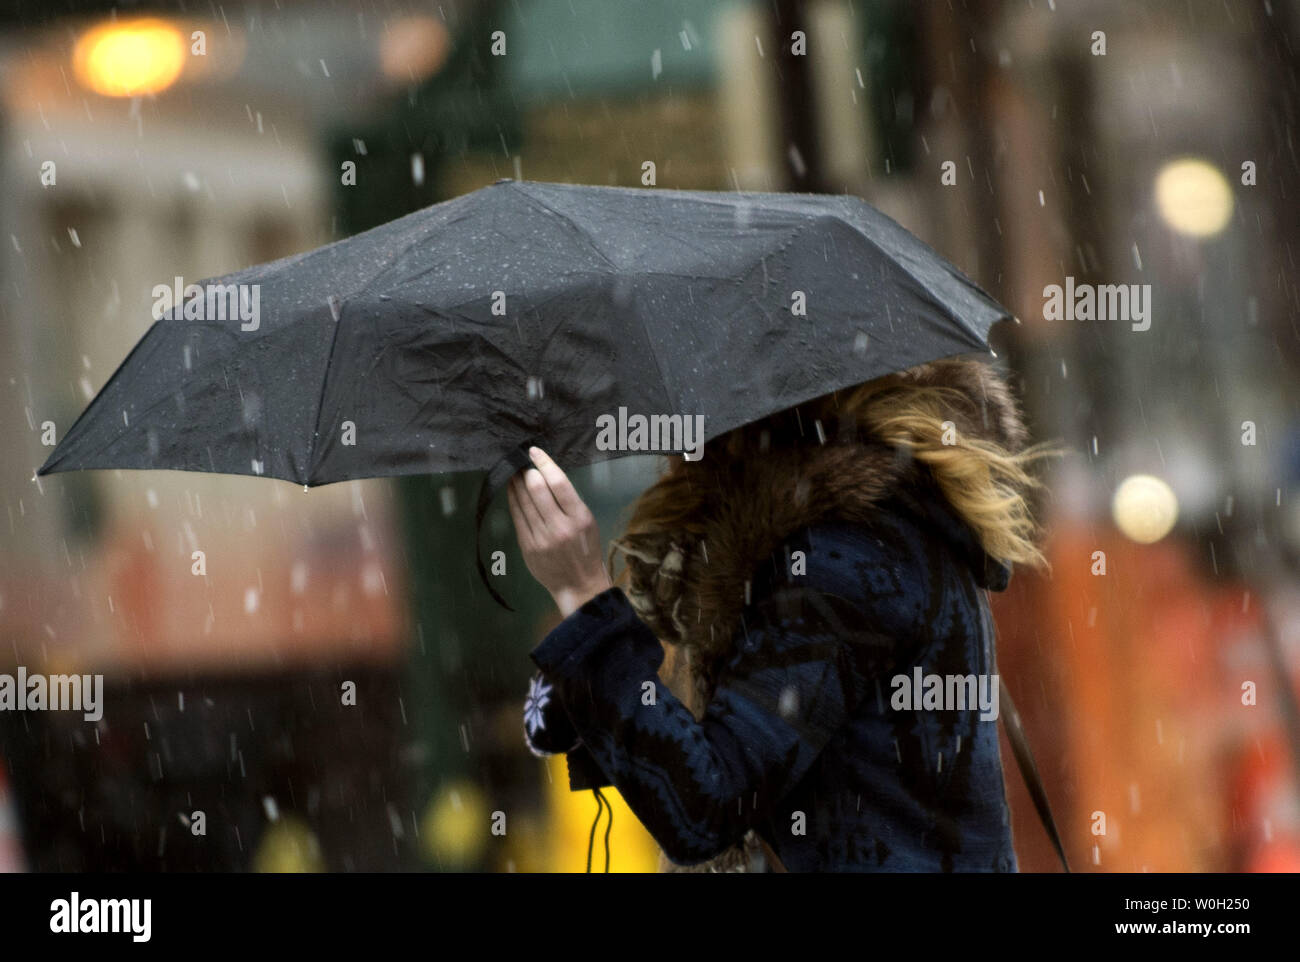 A woman shields herself from rain and snow on March 6, 2013 in Washington, D.C. Despite a slow start meteorologist are predicting anywhere from five to ten inches of snow to fall inside the Capital Beltway, and significantly more further north and west.  UPI/Kevin Dietsch Stock Photo